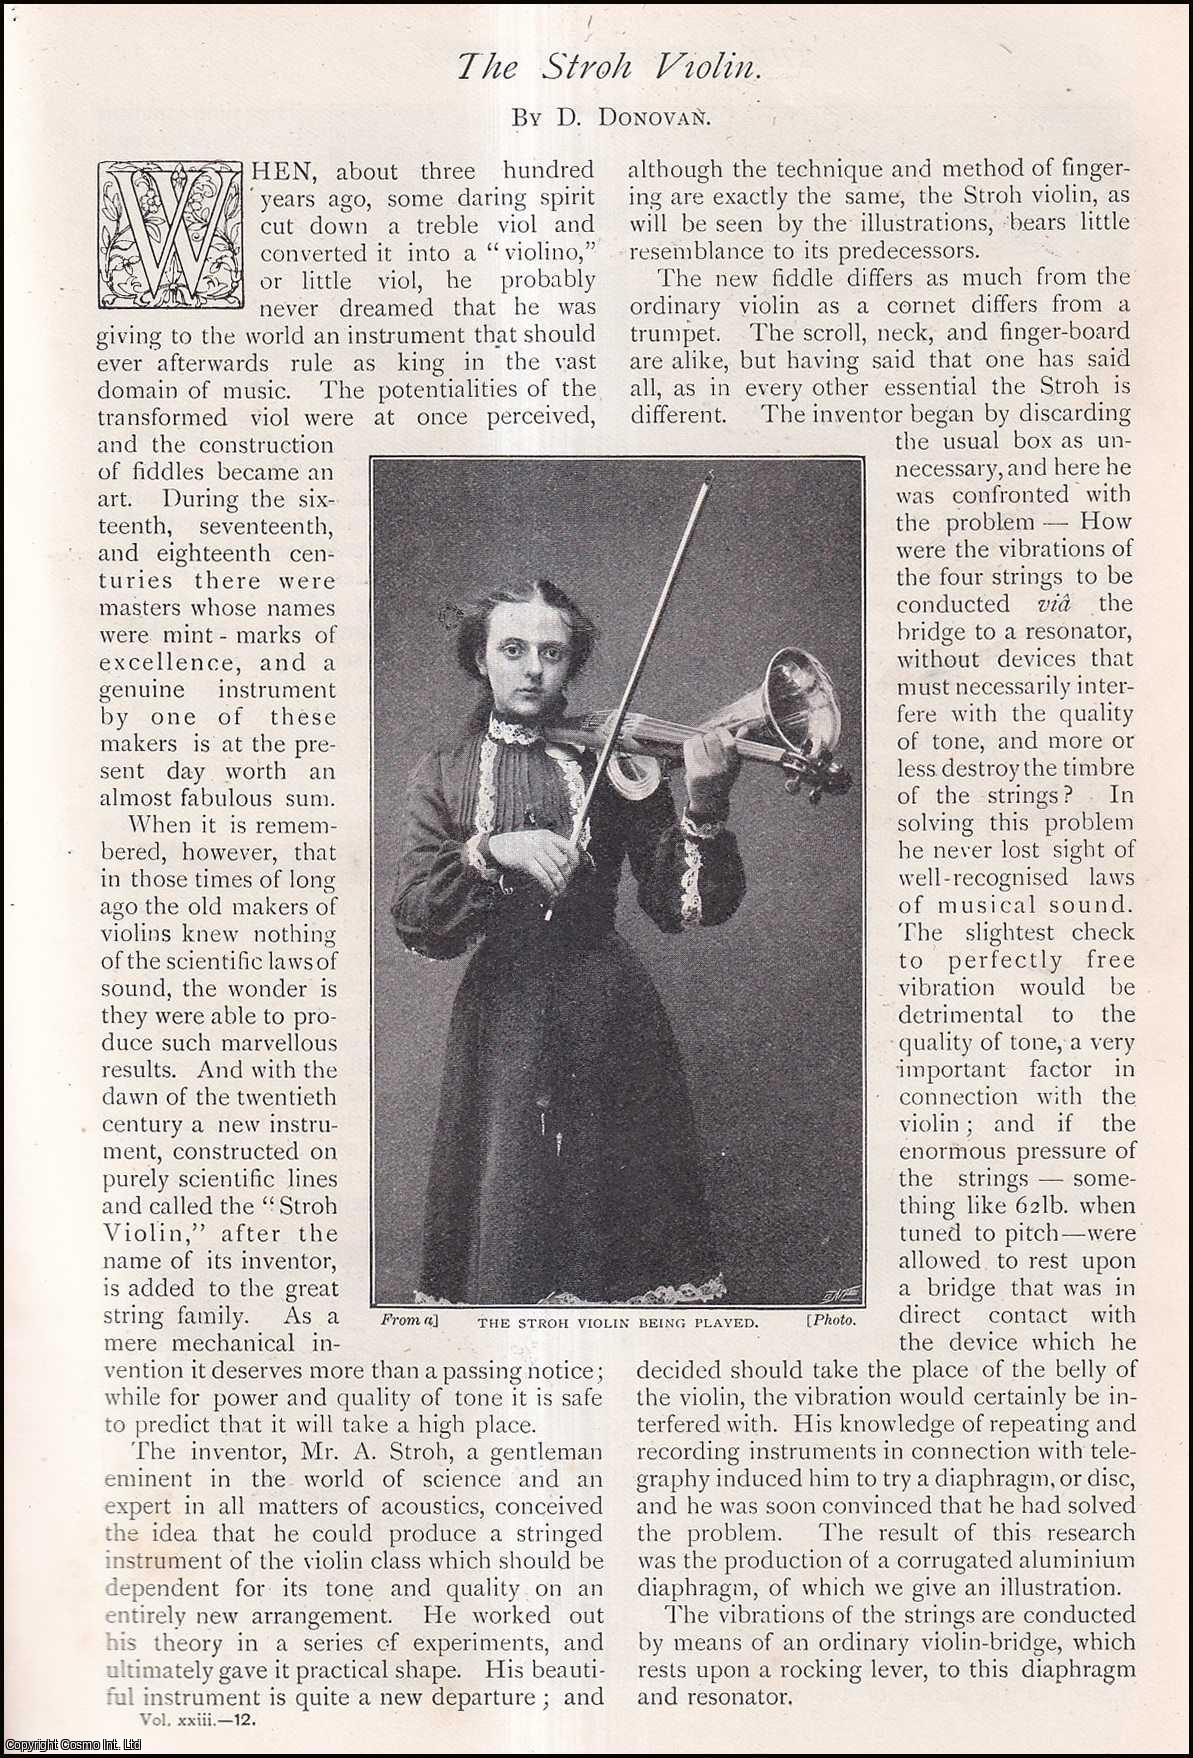 D. Donovan - The Stroh Violin. An uncommon original article from The Strand Magazine, 1902.